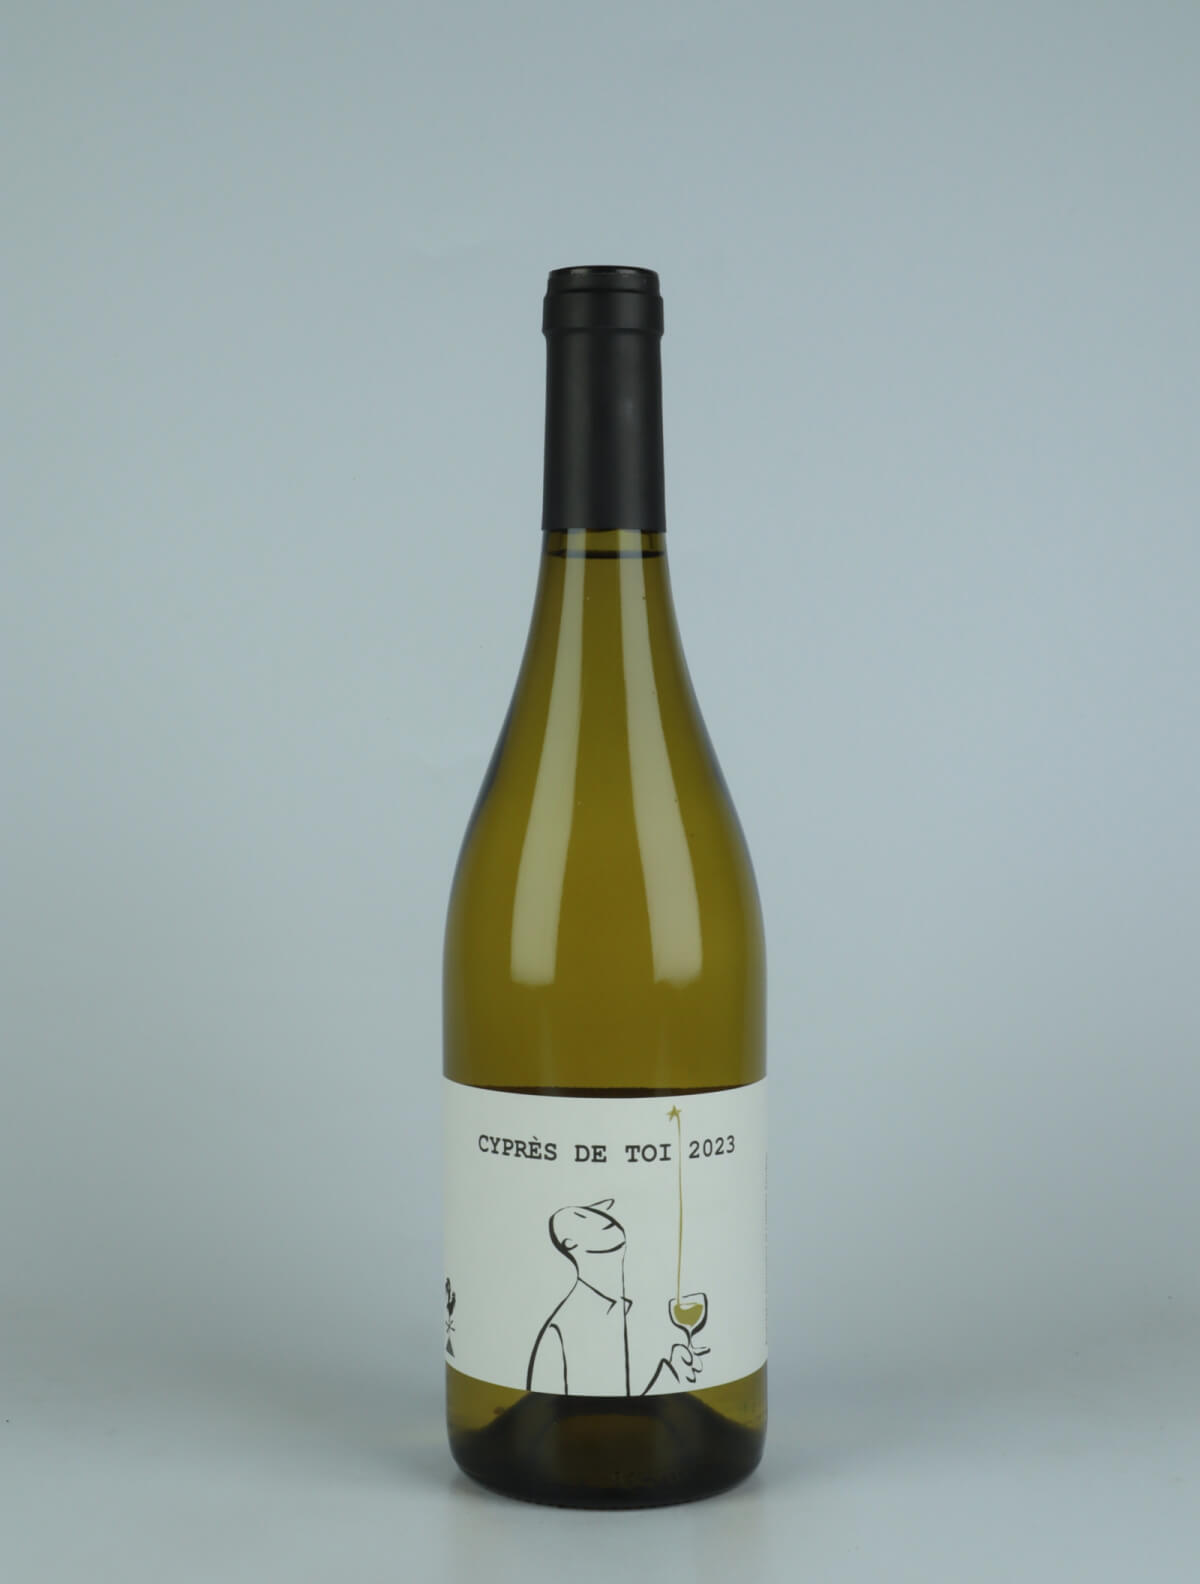 A bottle 2023 Cypres de Toi Blanc White wine from Fond Cyprès, Languedoc in France